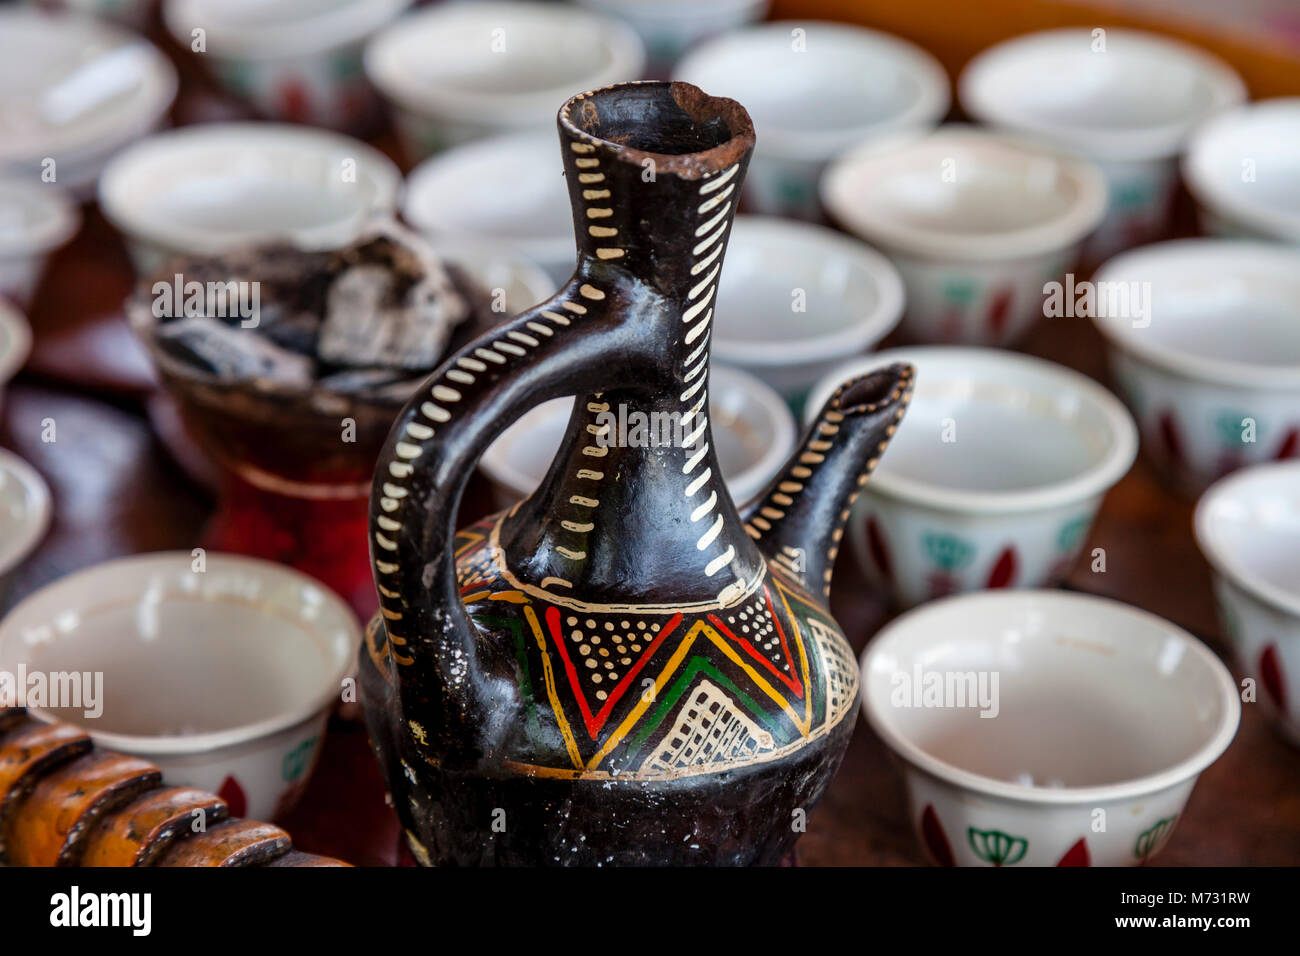 A Traditional Coffee Pot and Cups Used In An Ethiopian Coffee Ceremony,  Arba Minch, Ethiopia Stock Photo - Alamy